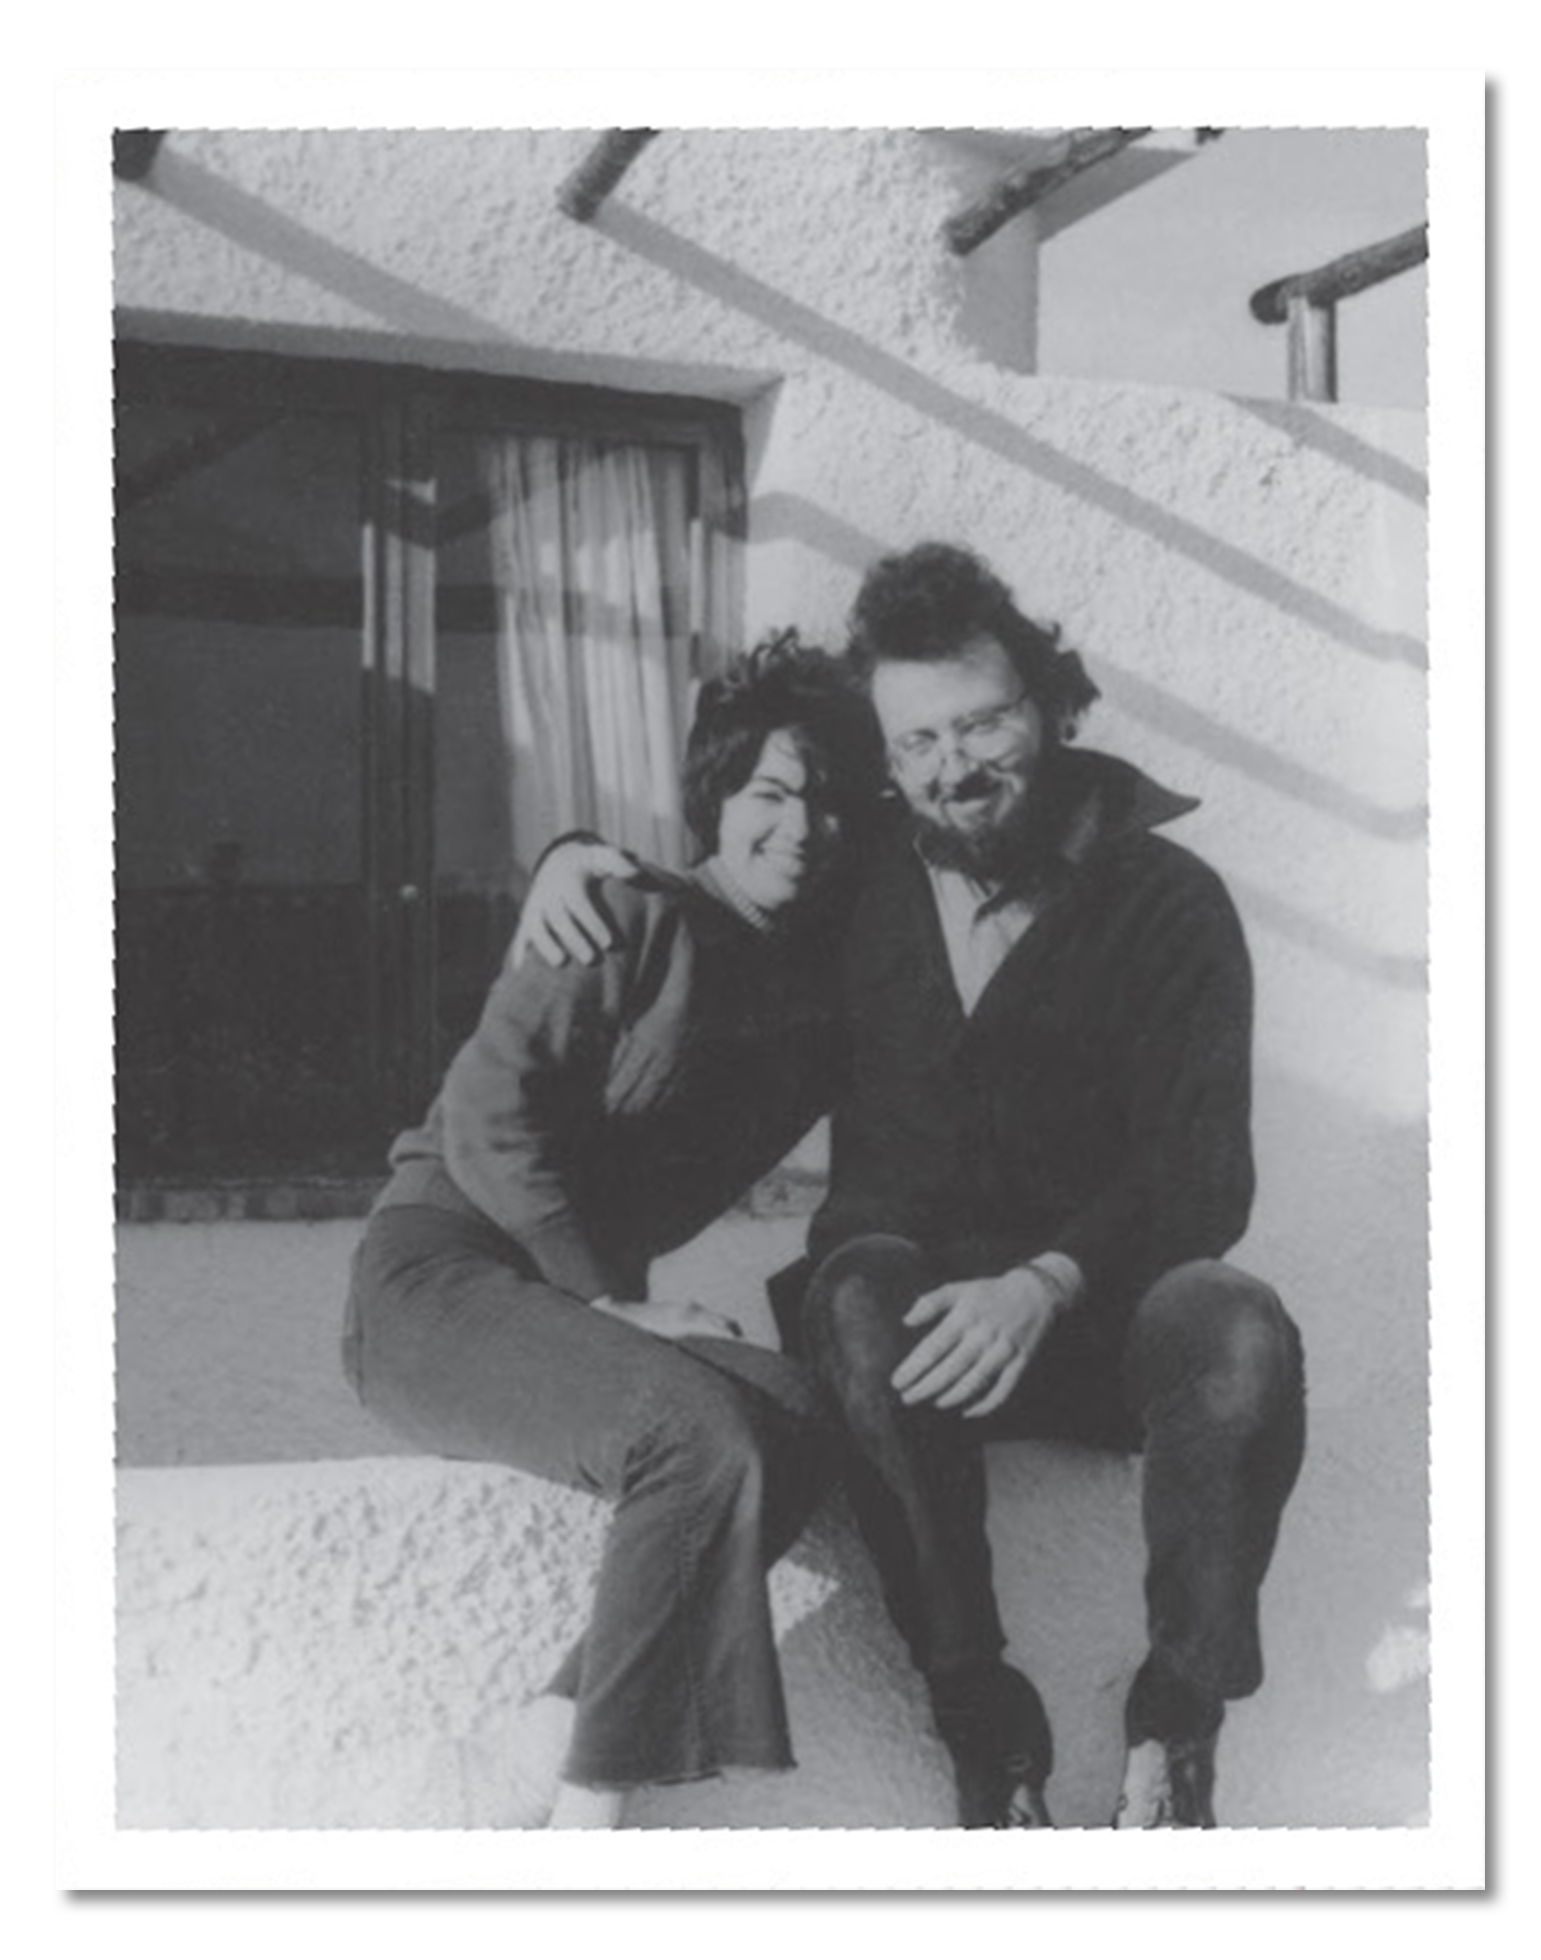 Sy Safransky and his first wife, Judy, are smiling and sitting closely together on white, stucco-looking steps at a property on the beach in Algeciras, Spain, in 1970. Sy has his arm around Judy’s shoulder.